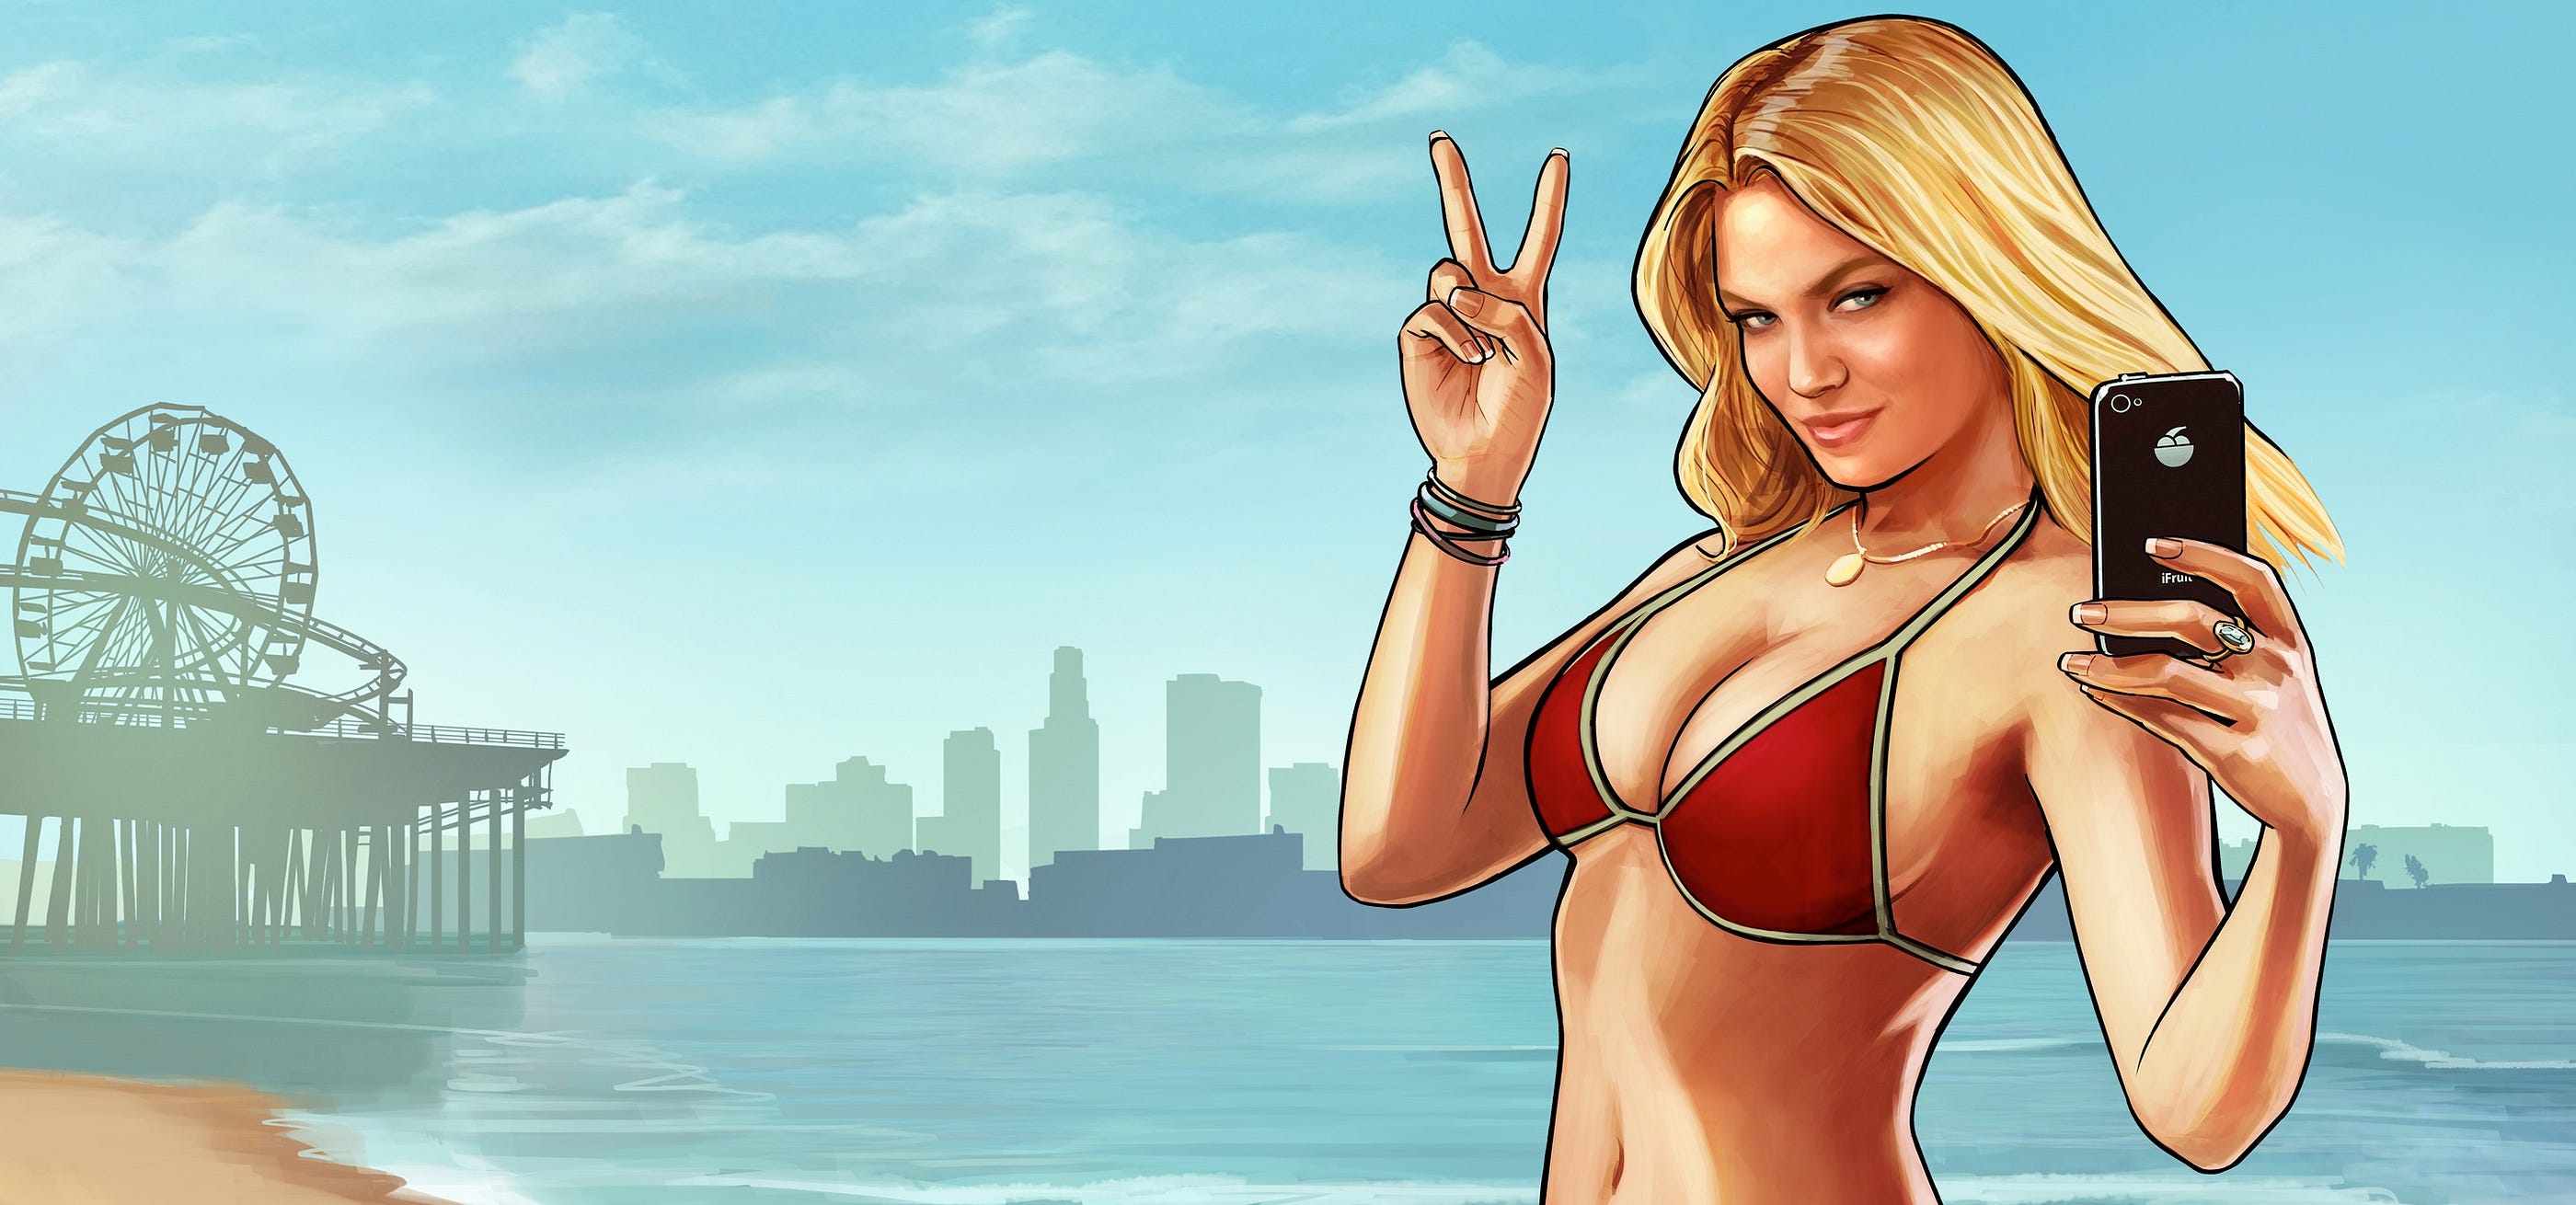 I'm Playing Grand Theft Auto V For The First Time And It Lives Up To The  Hype - Game Informer